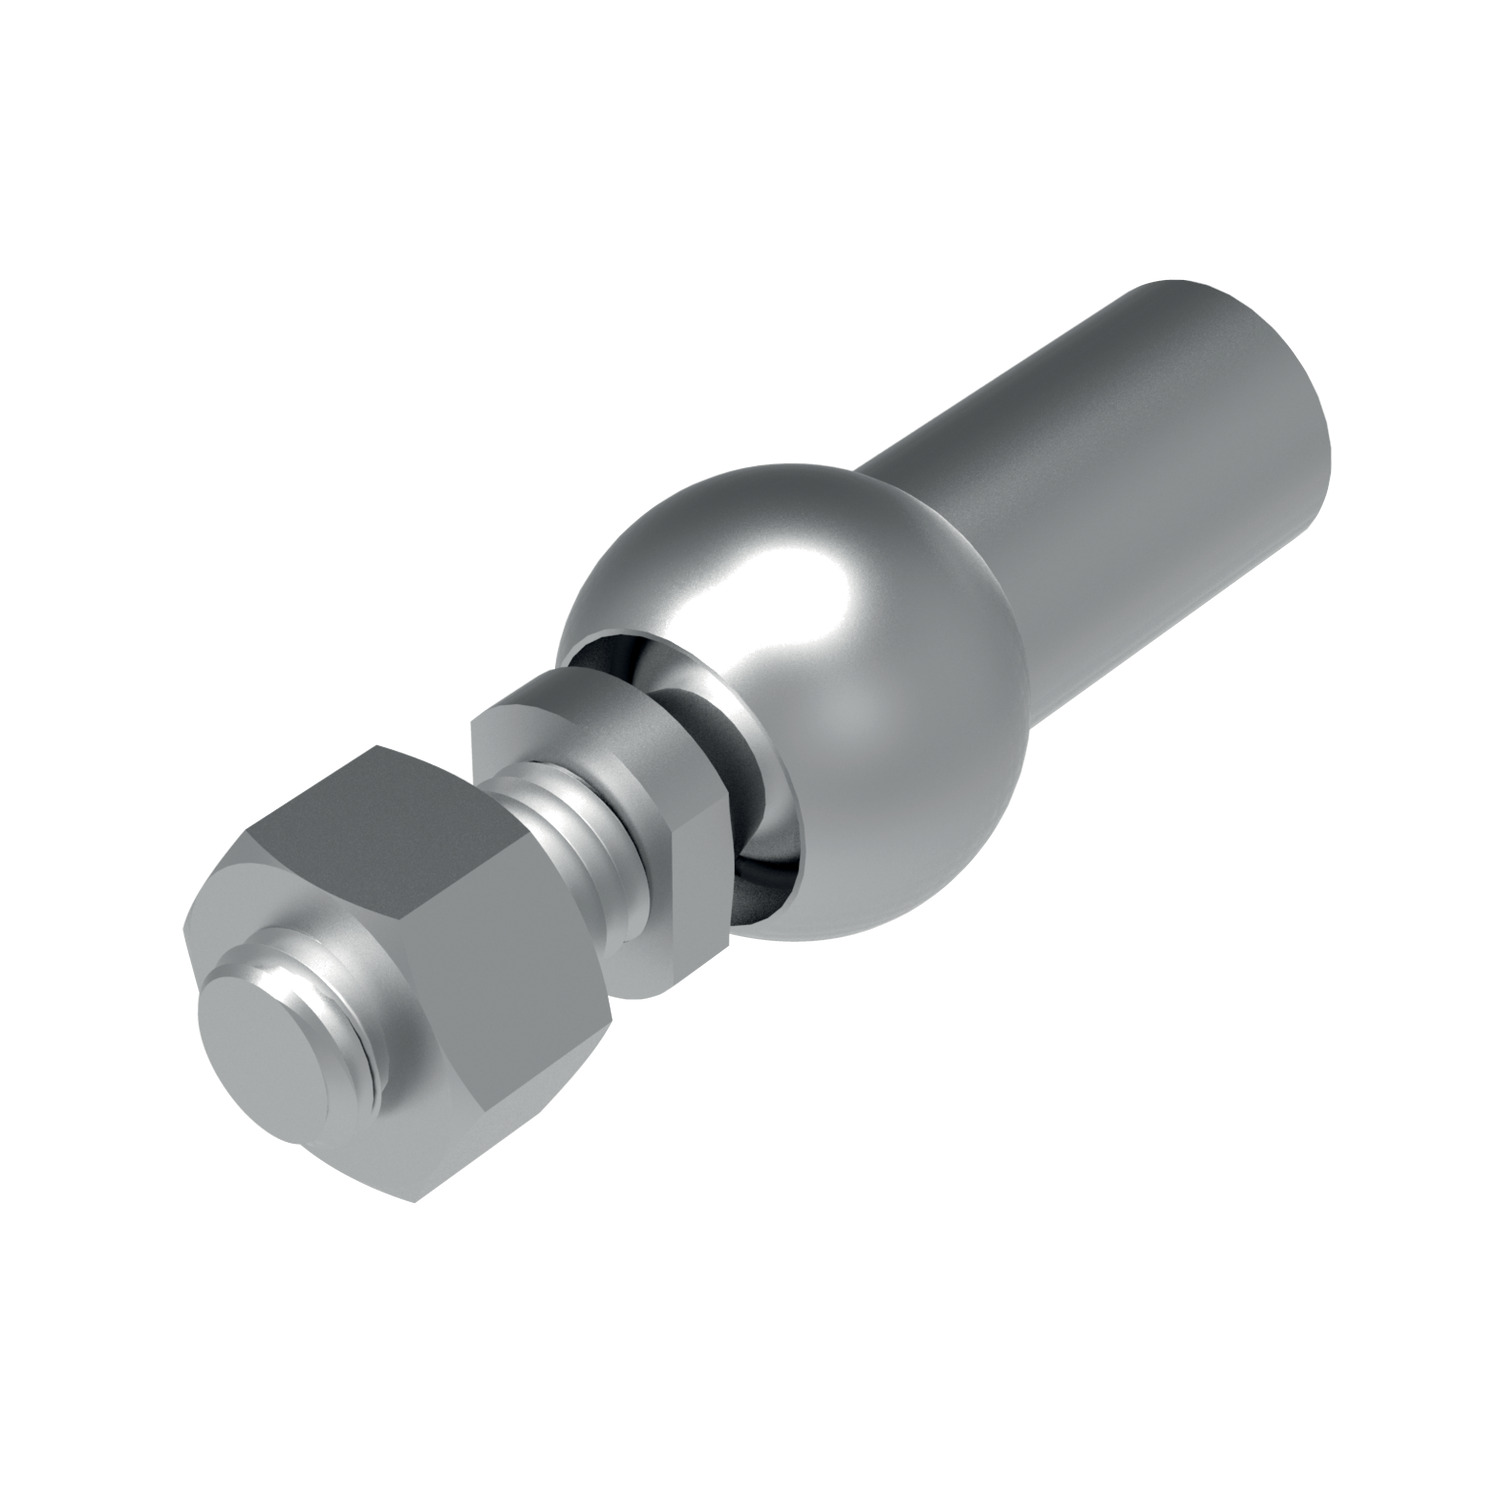 Product R3501, Axial Ball and Socket Joints left hand thread / 